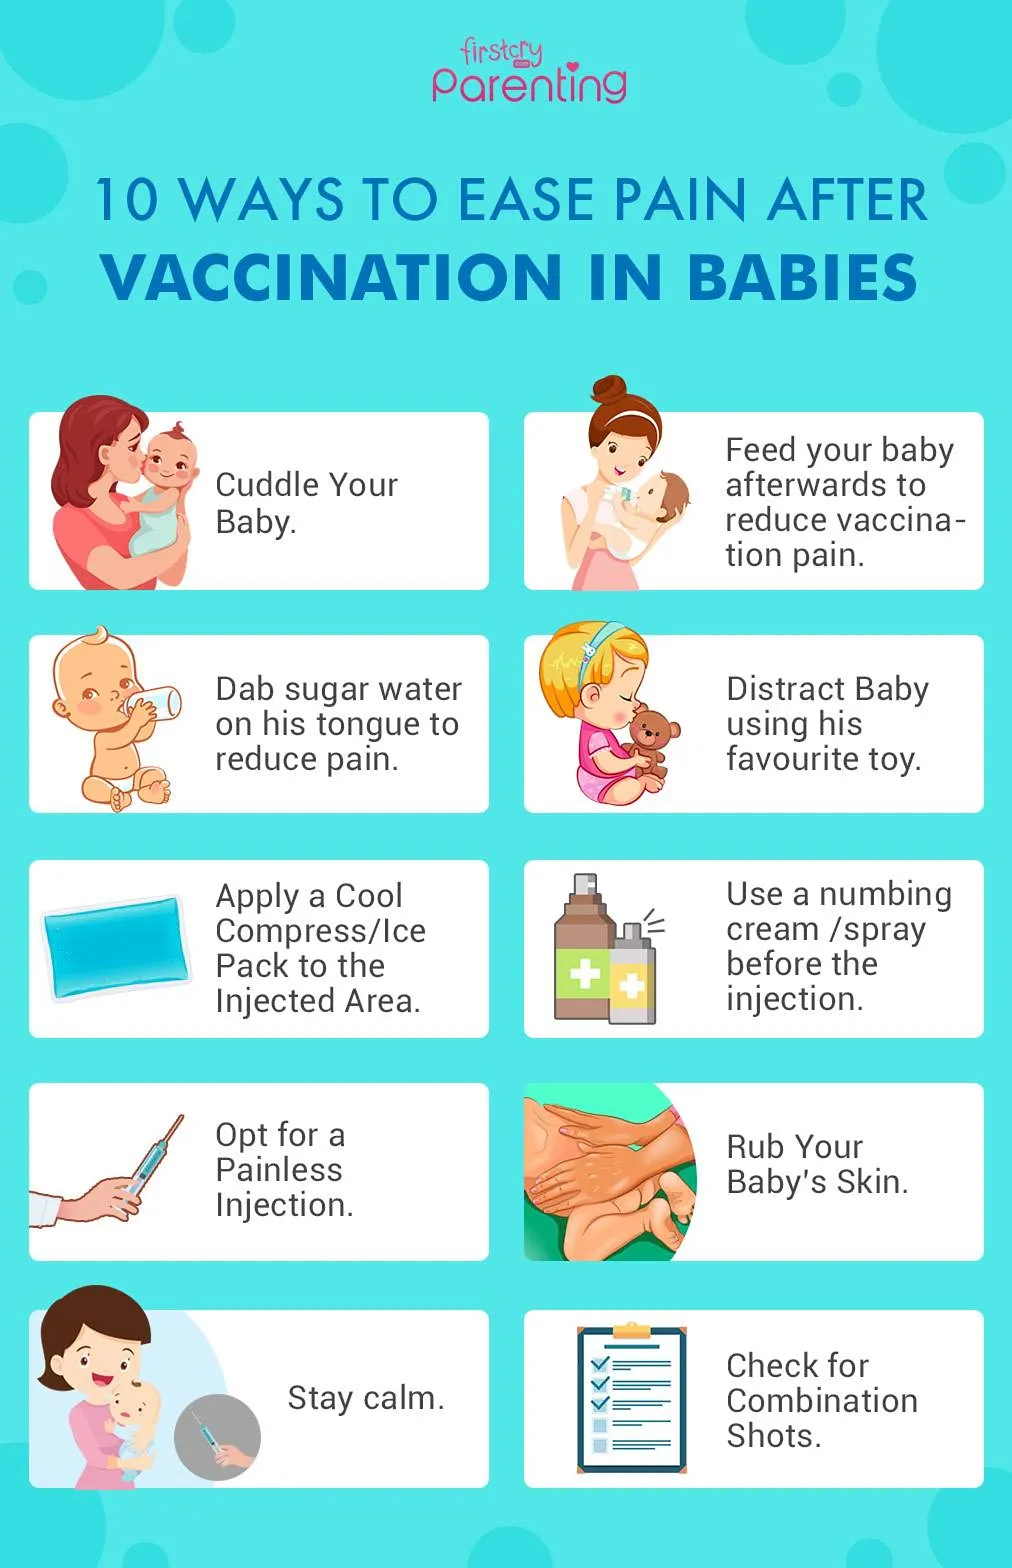 10 Ways to Ease Pain After Vaccination in Babies